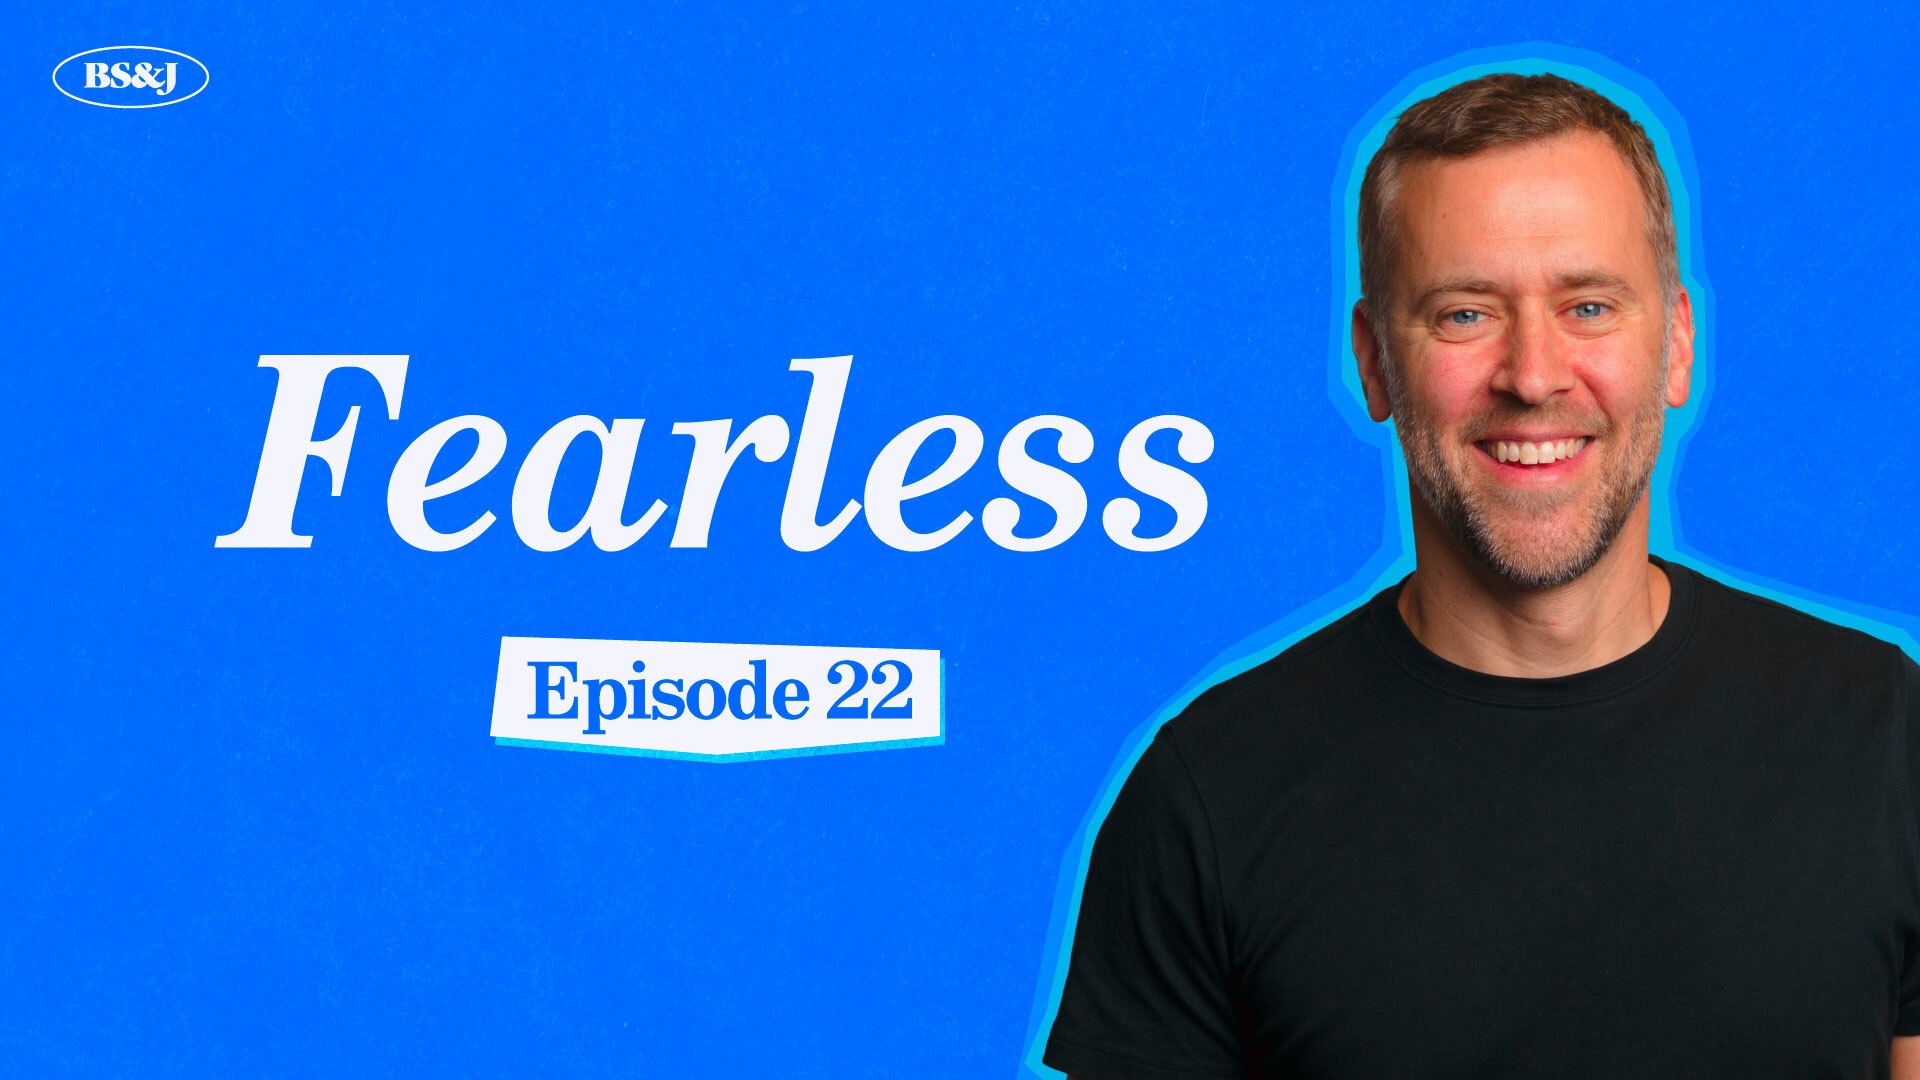 Episode 22 – Fearless